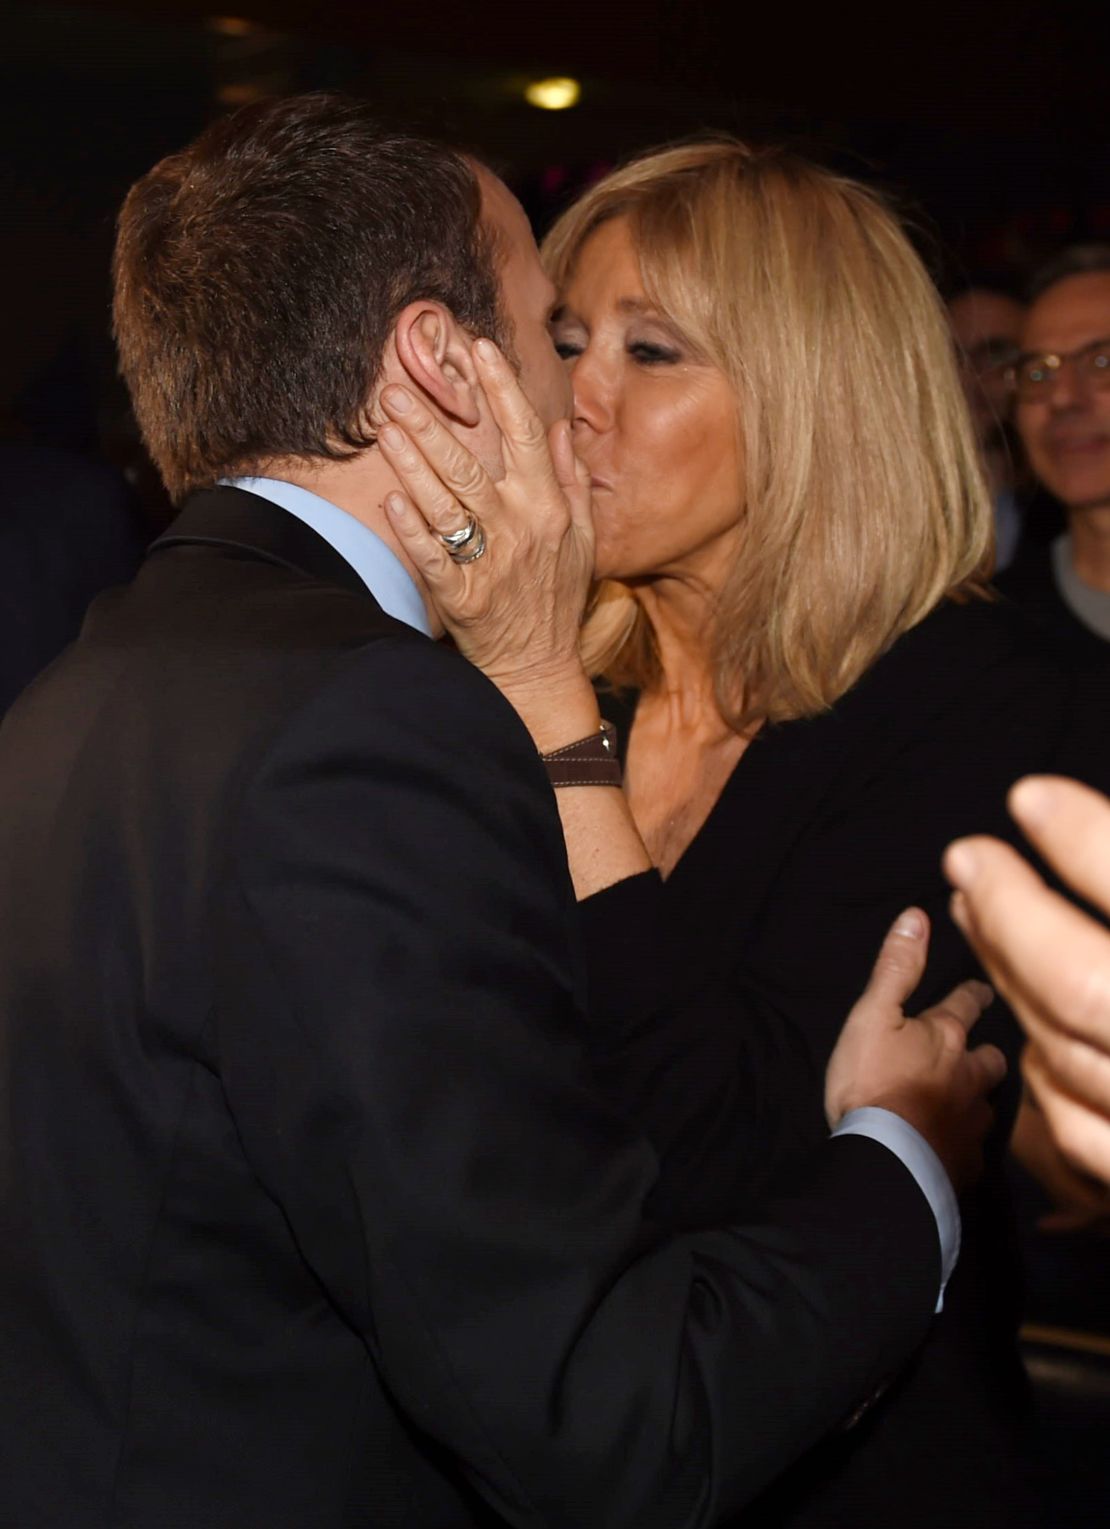 Emmanuel Macron kisses his wife as he arrives for a campaign rally on March 9.